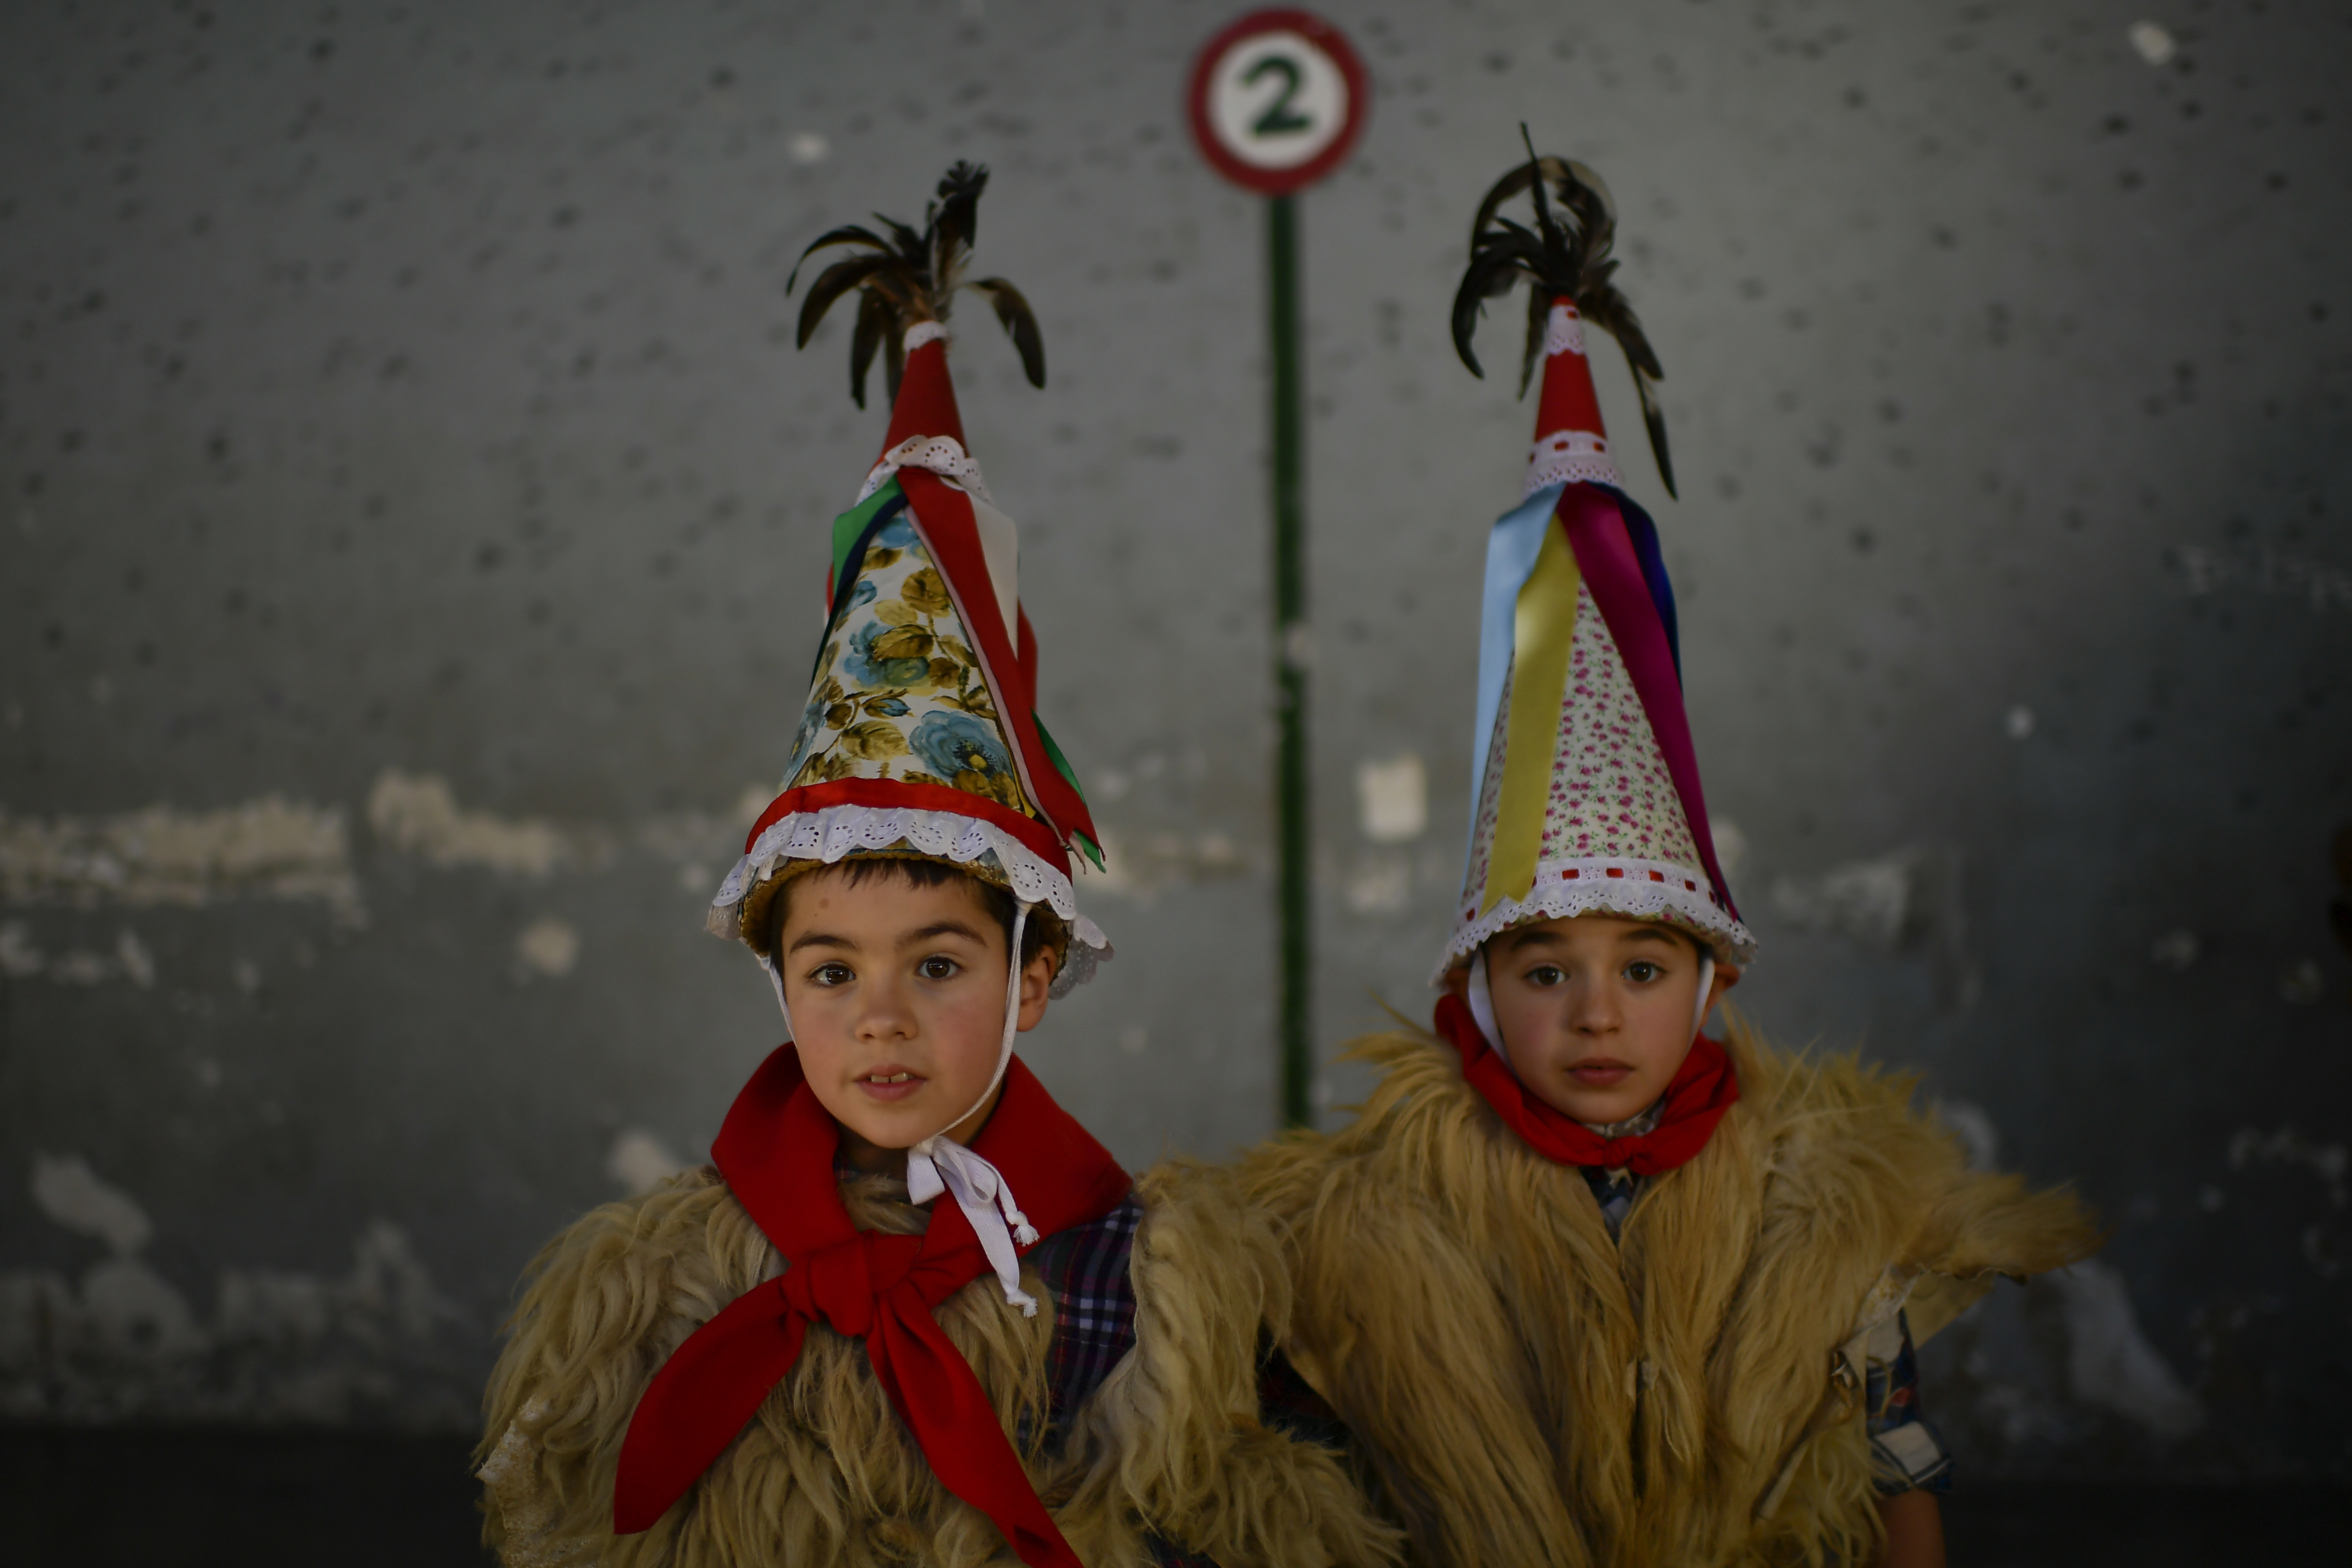 EDS NOTE : SPANISH LAW REQUIRES THAT THE FACES OF MINORS ARE MASKED IN PUBLICATIONS WITHIN SPAIN. Two young Joaldunaks called Zanpantzar, take part in the Carnival between the Pyrenees villages of Ituren and Zubieta, northern Spain, Monday, Jan. 30, 2017. In one of the most ancient carnivals in Europe, dating from before the Roman empire, companies of Joaldunak (cowbells) made up of residents of two towns, Ituren and Zubieta, parade the streets costumed in sandals, lace petticoats, sheepskins around the waist and shoulders, coloured neckerchiefs, conical caps with ribbons and a hyssop of horsehair in their right hands and cowbells hung across their lower back. (AP Photo/Alvaro Barrientos)